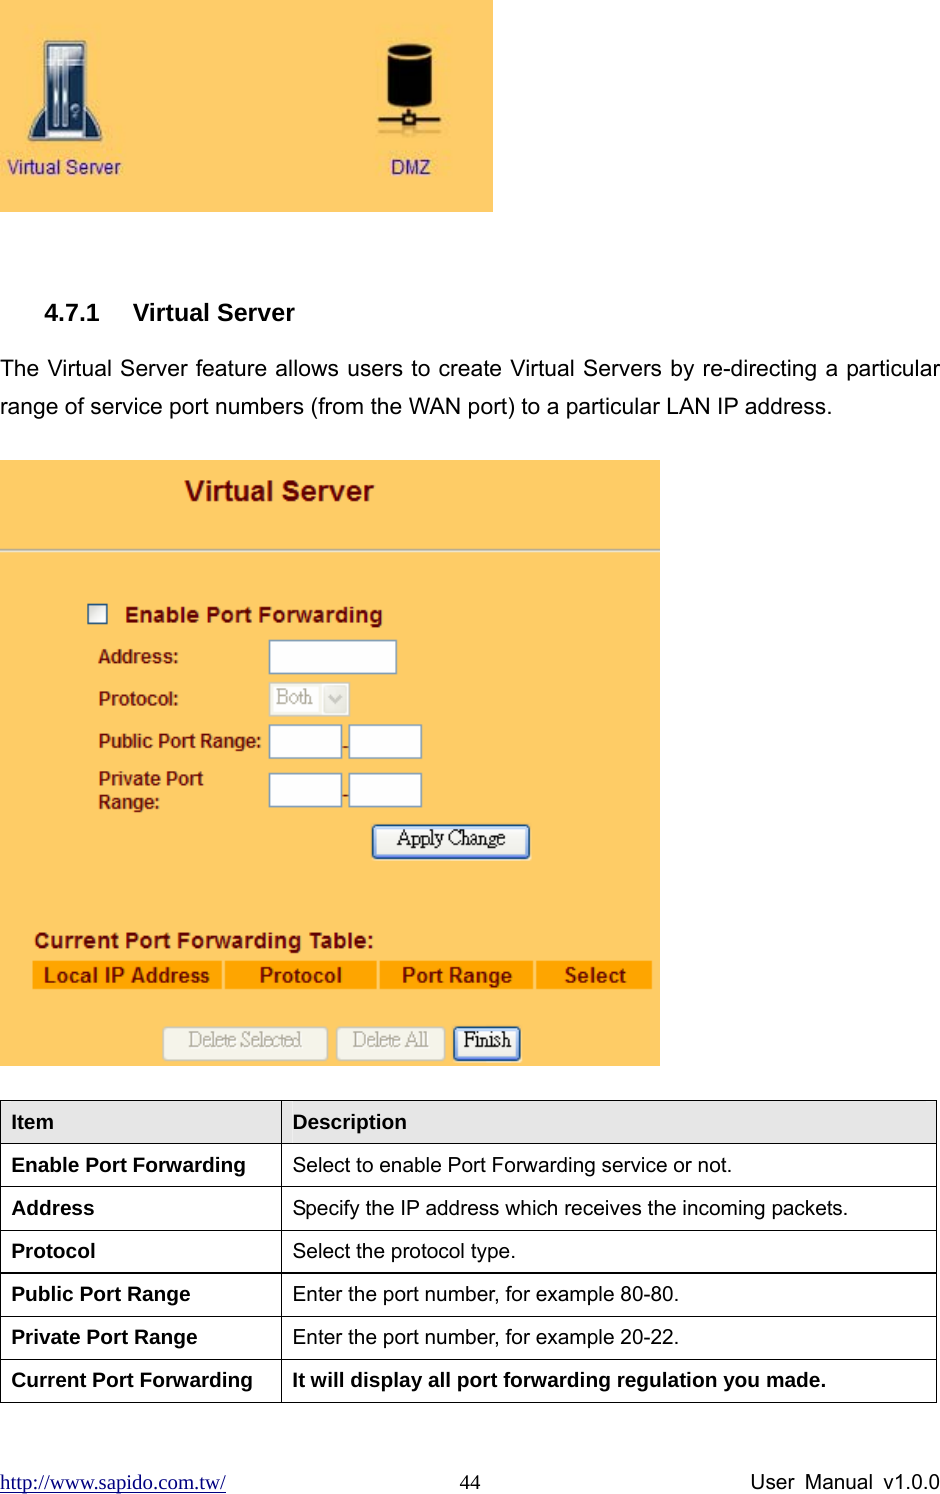 http://www.sapido.com.tw/                User Manual v1.0.0 44  4.7.1 Virtual Server  The Virtual Server feature allows users to create Virtual Servers by re-directing a particular range of service port numbers (from the WAN port) to a particular LAN IP address.    Item  Description Enable Port Forwarding  Select to enable Port Forwarding service or not. Address  Specify the IP address which receives the incoming packets. Protocol  Select the protocol type. Public Port Range  Enter the port number, for example 80-80. Private Port Range  Enter the port number, for example 20-22. Current Port Forwarding    It will display all port forwarding regulation you made. 